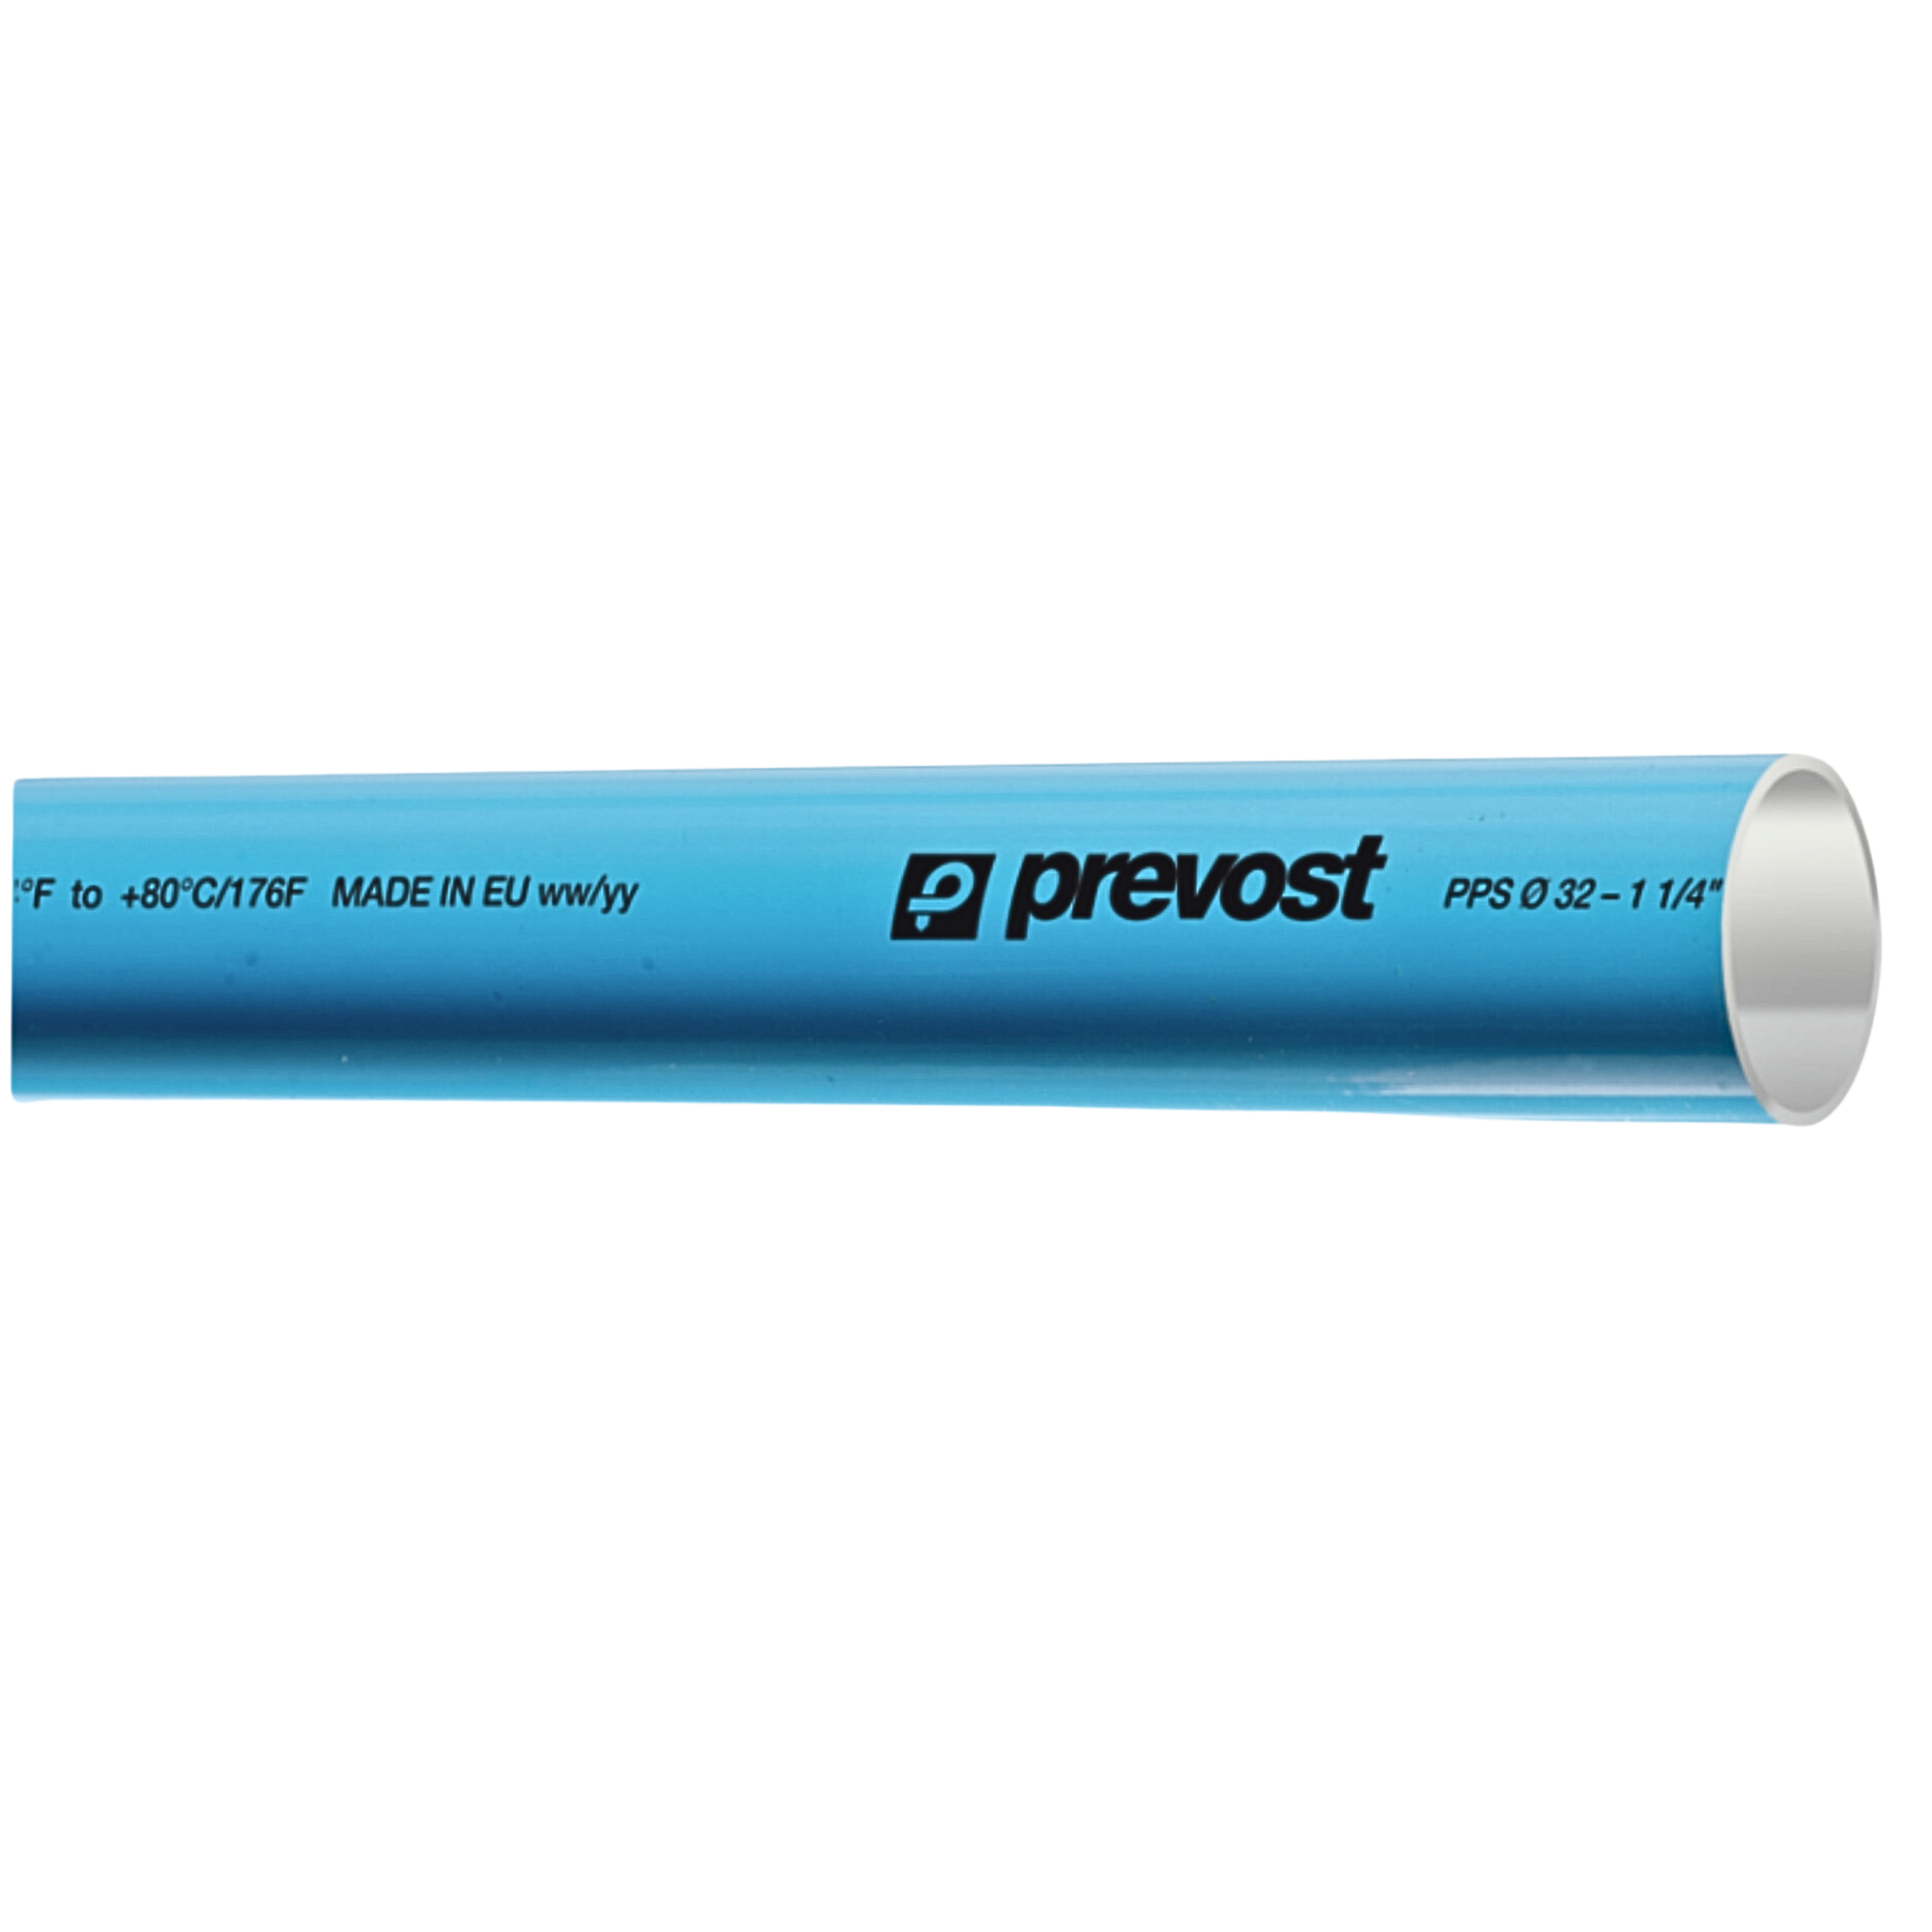 PPS - Aluminum 1" blue pipe for compressed air used on prevos1 product line